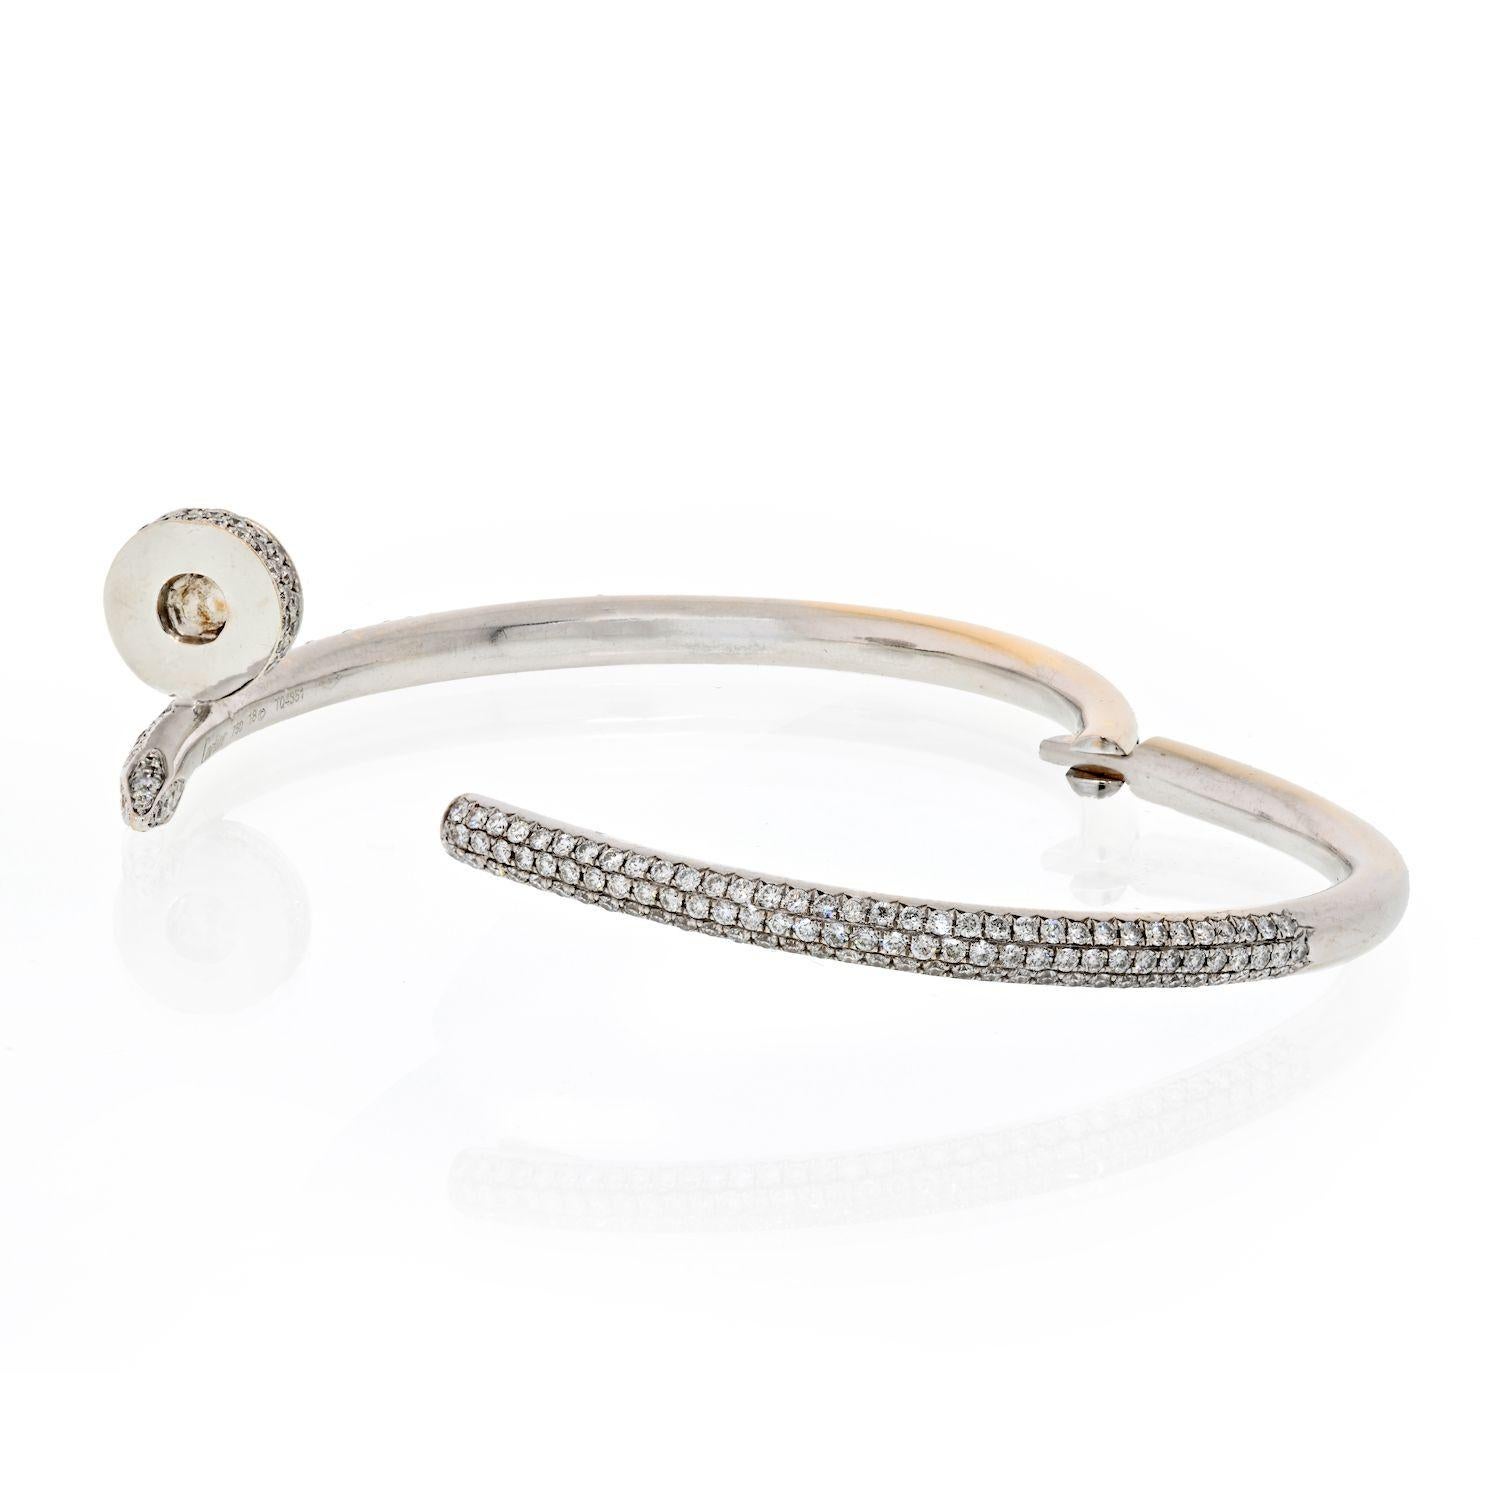 A stunning 18k white gold diamond bangle by Cartier from the Juste Un Clou collection. The bangle is of a nail design, fully pave set around the outer side with 374 round brilliant cut diamonds totaling 2.26ct. The bangle is a size 18 and has the